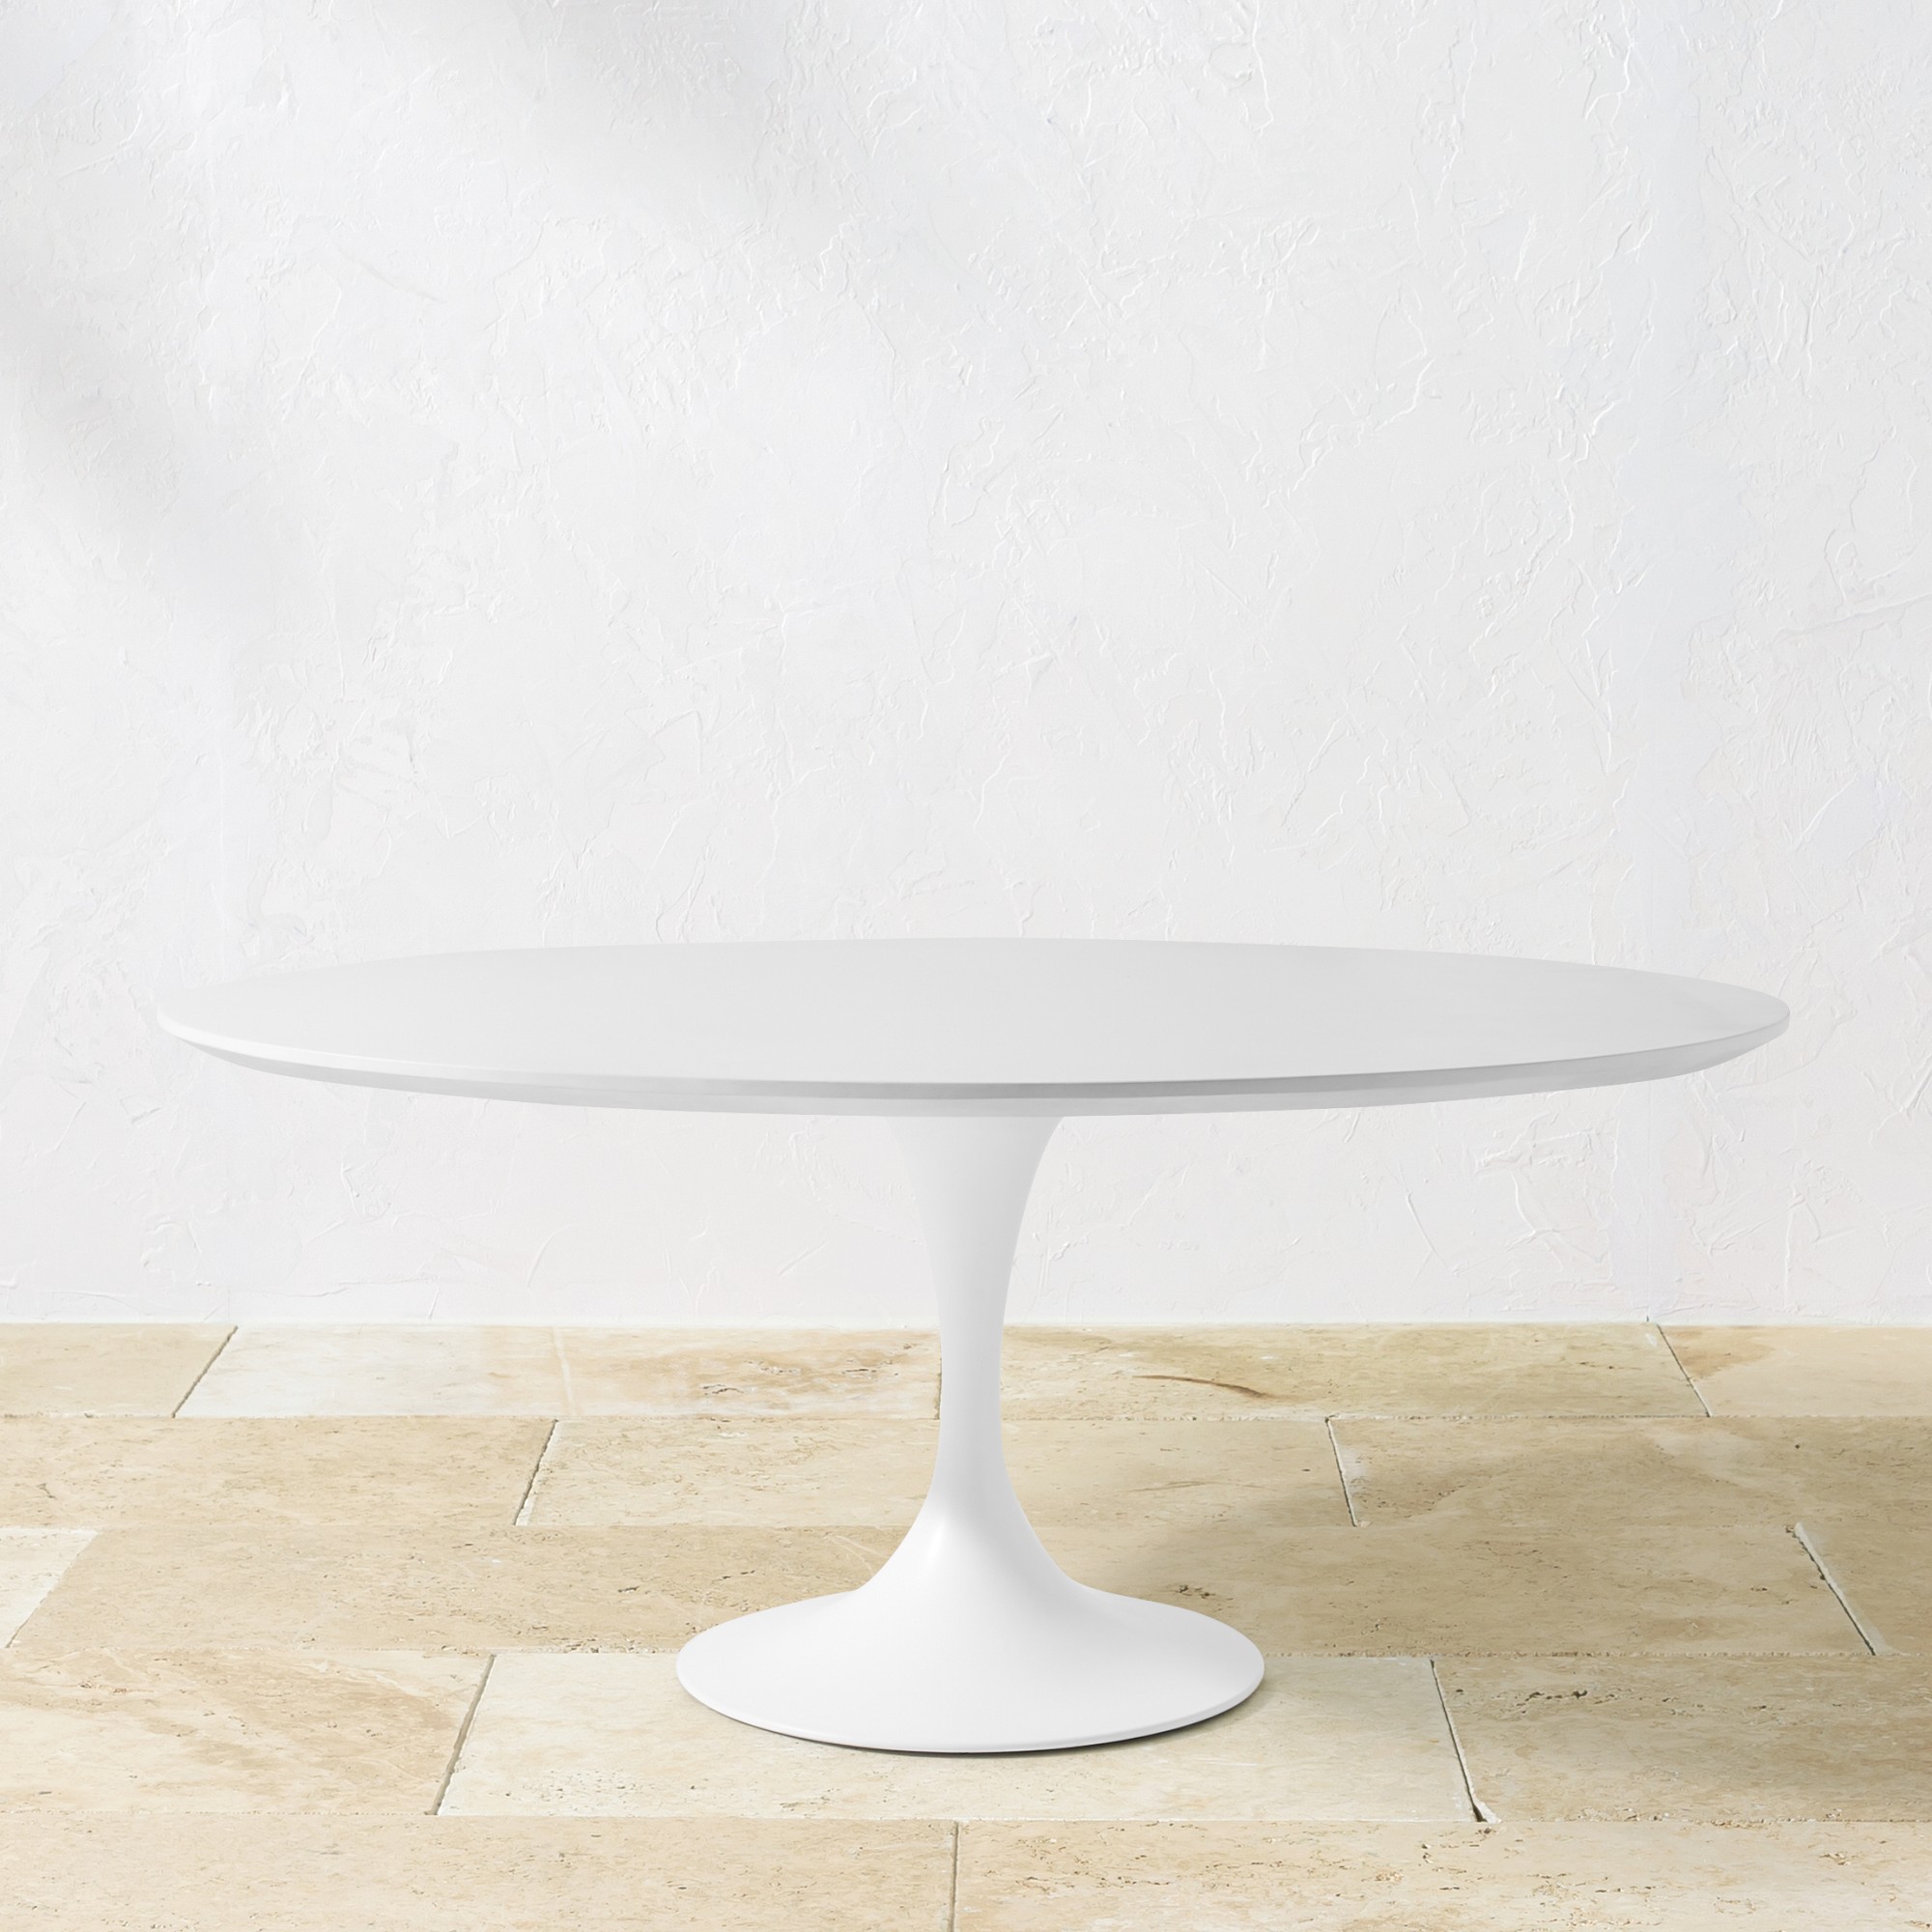 Tulip 70" Outdoor Concrete Oval Dining Table, White